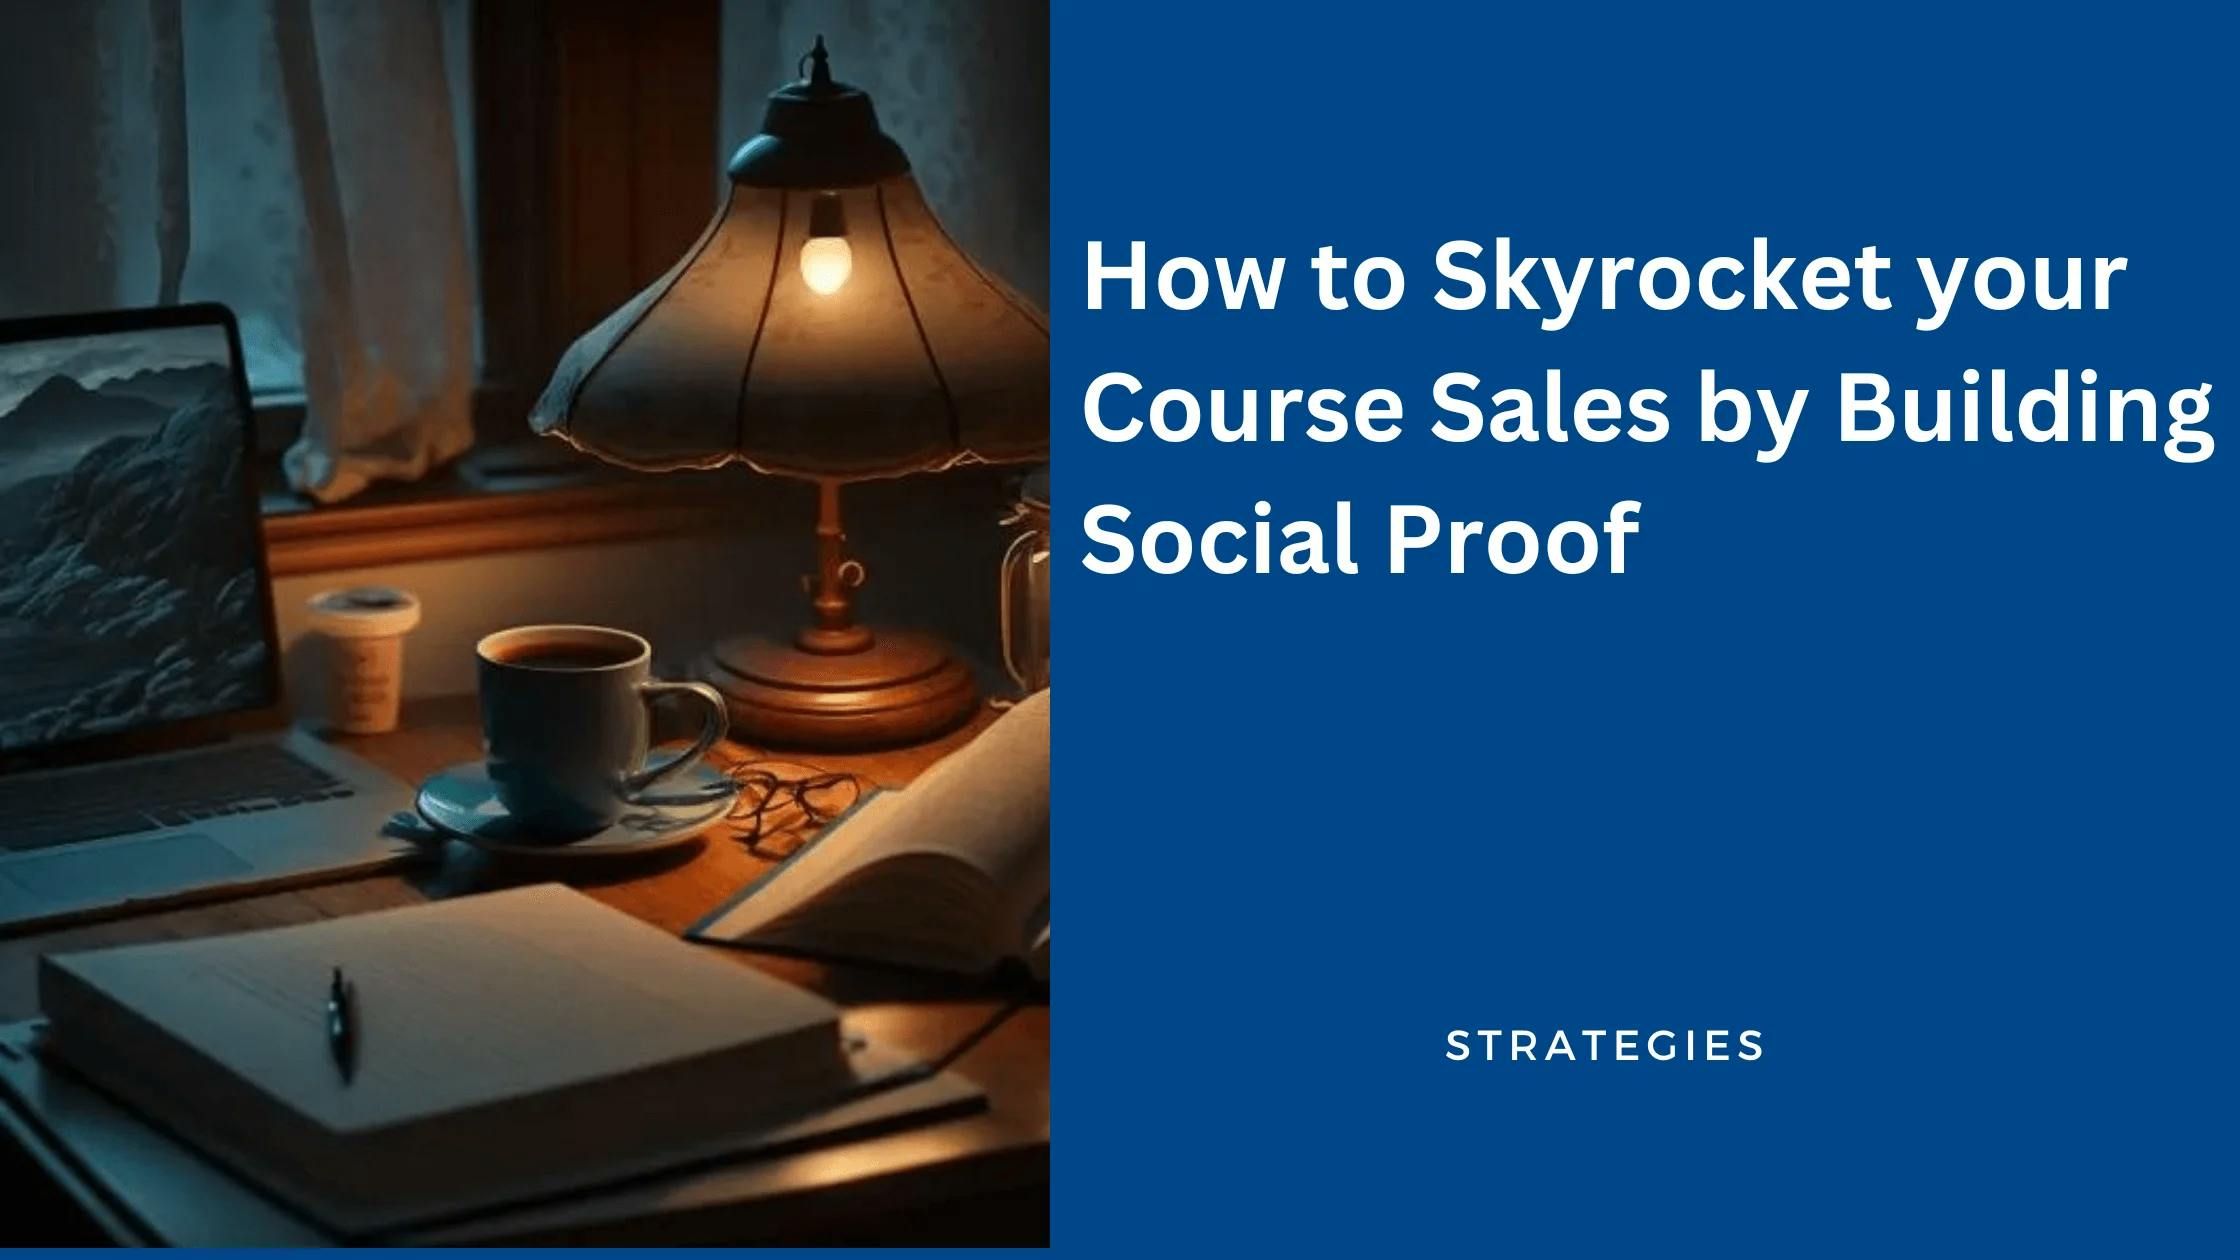 How to Skyrocket your Course Sales by Building Social Proof